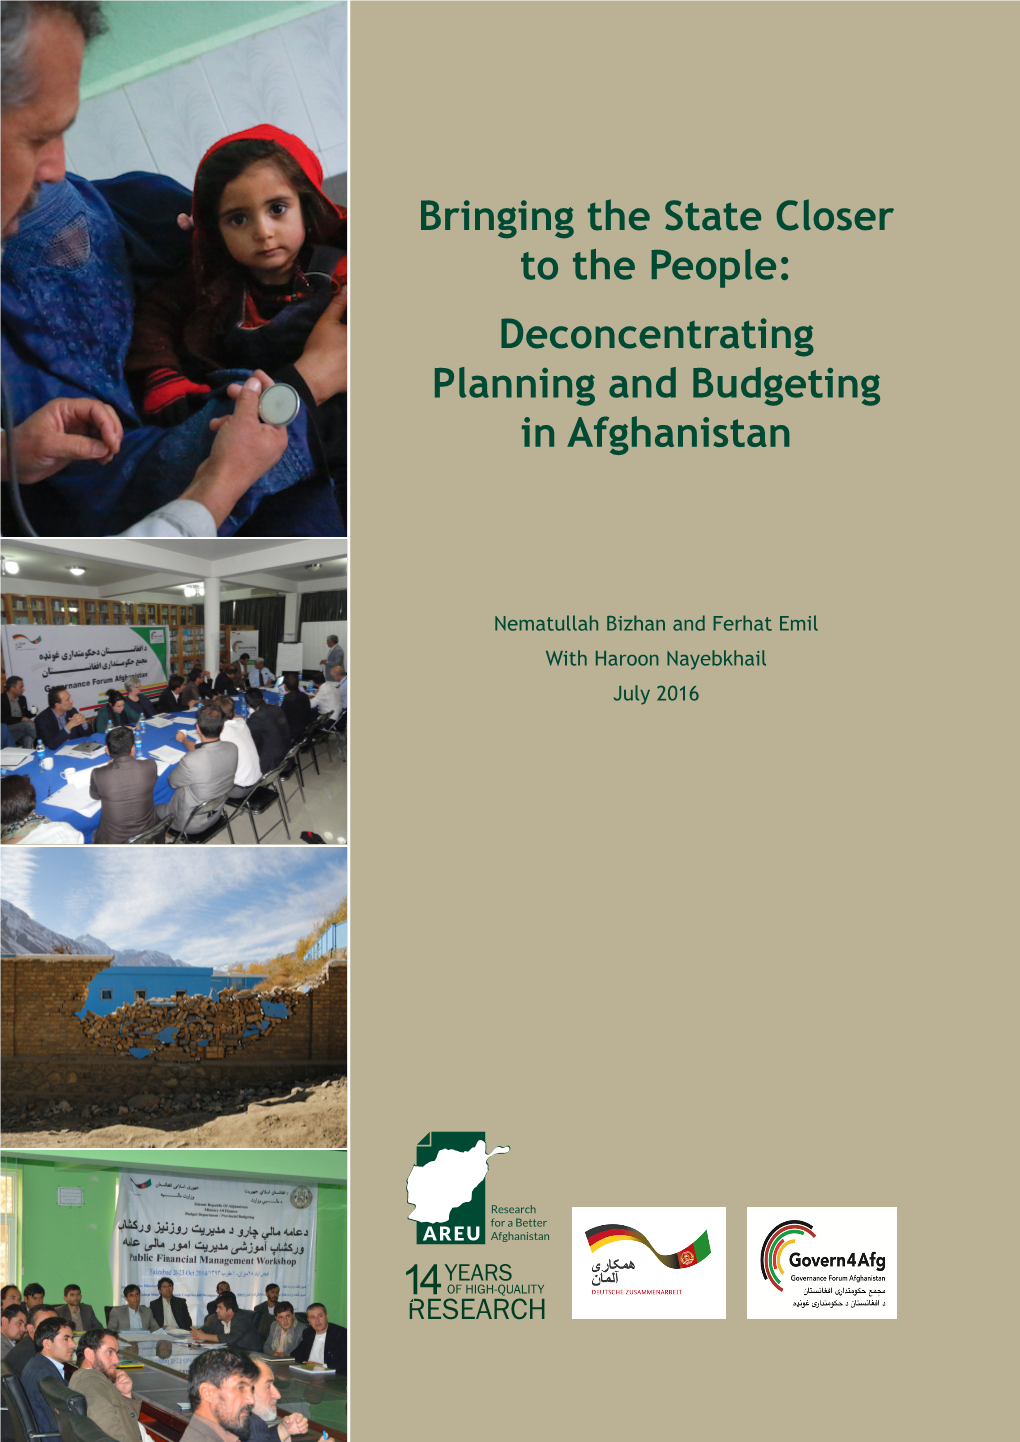 Deconcentrating Planning and Budgeting in Afghanistan